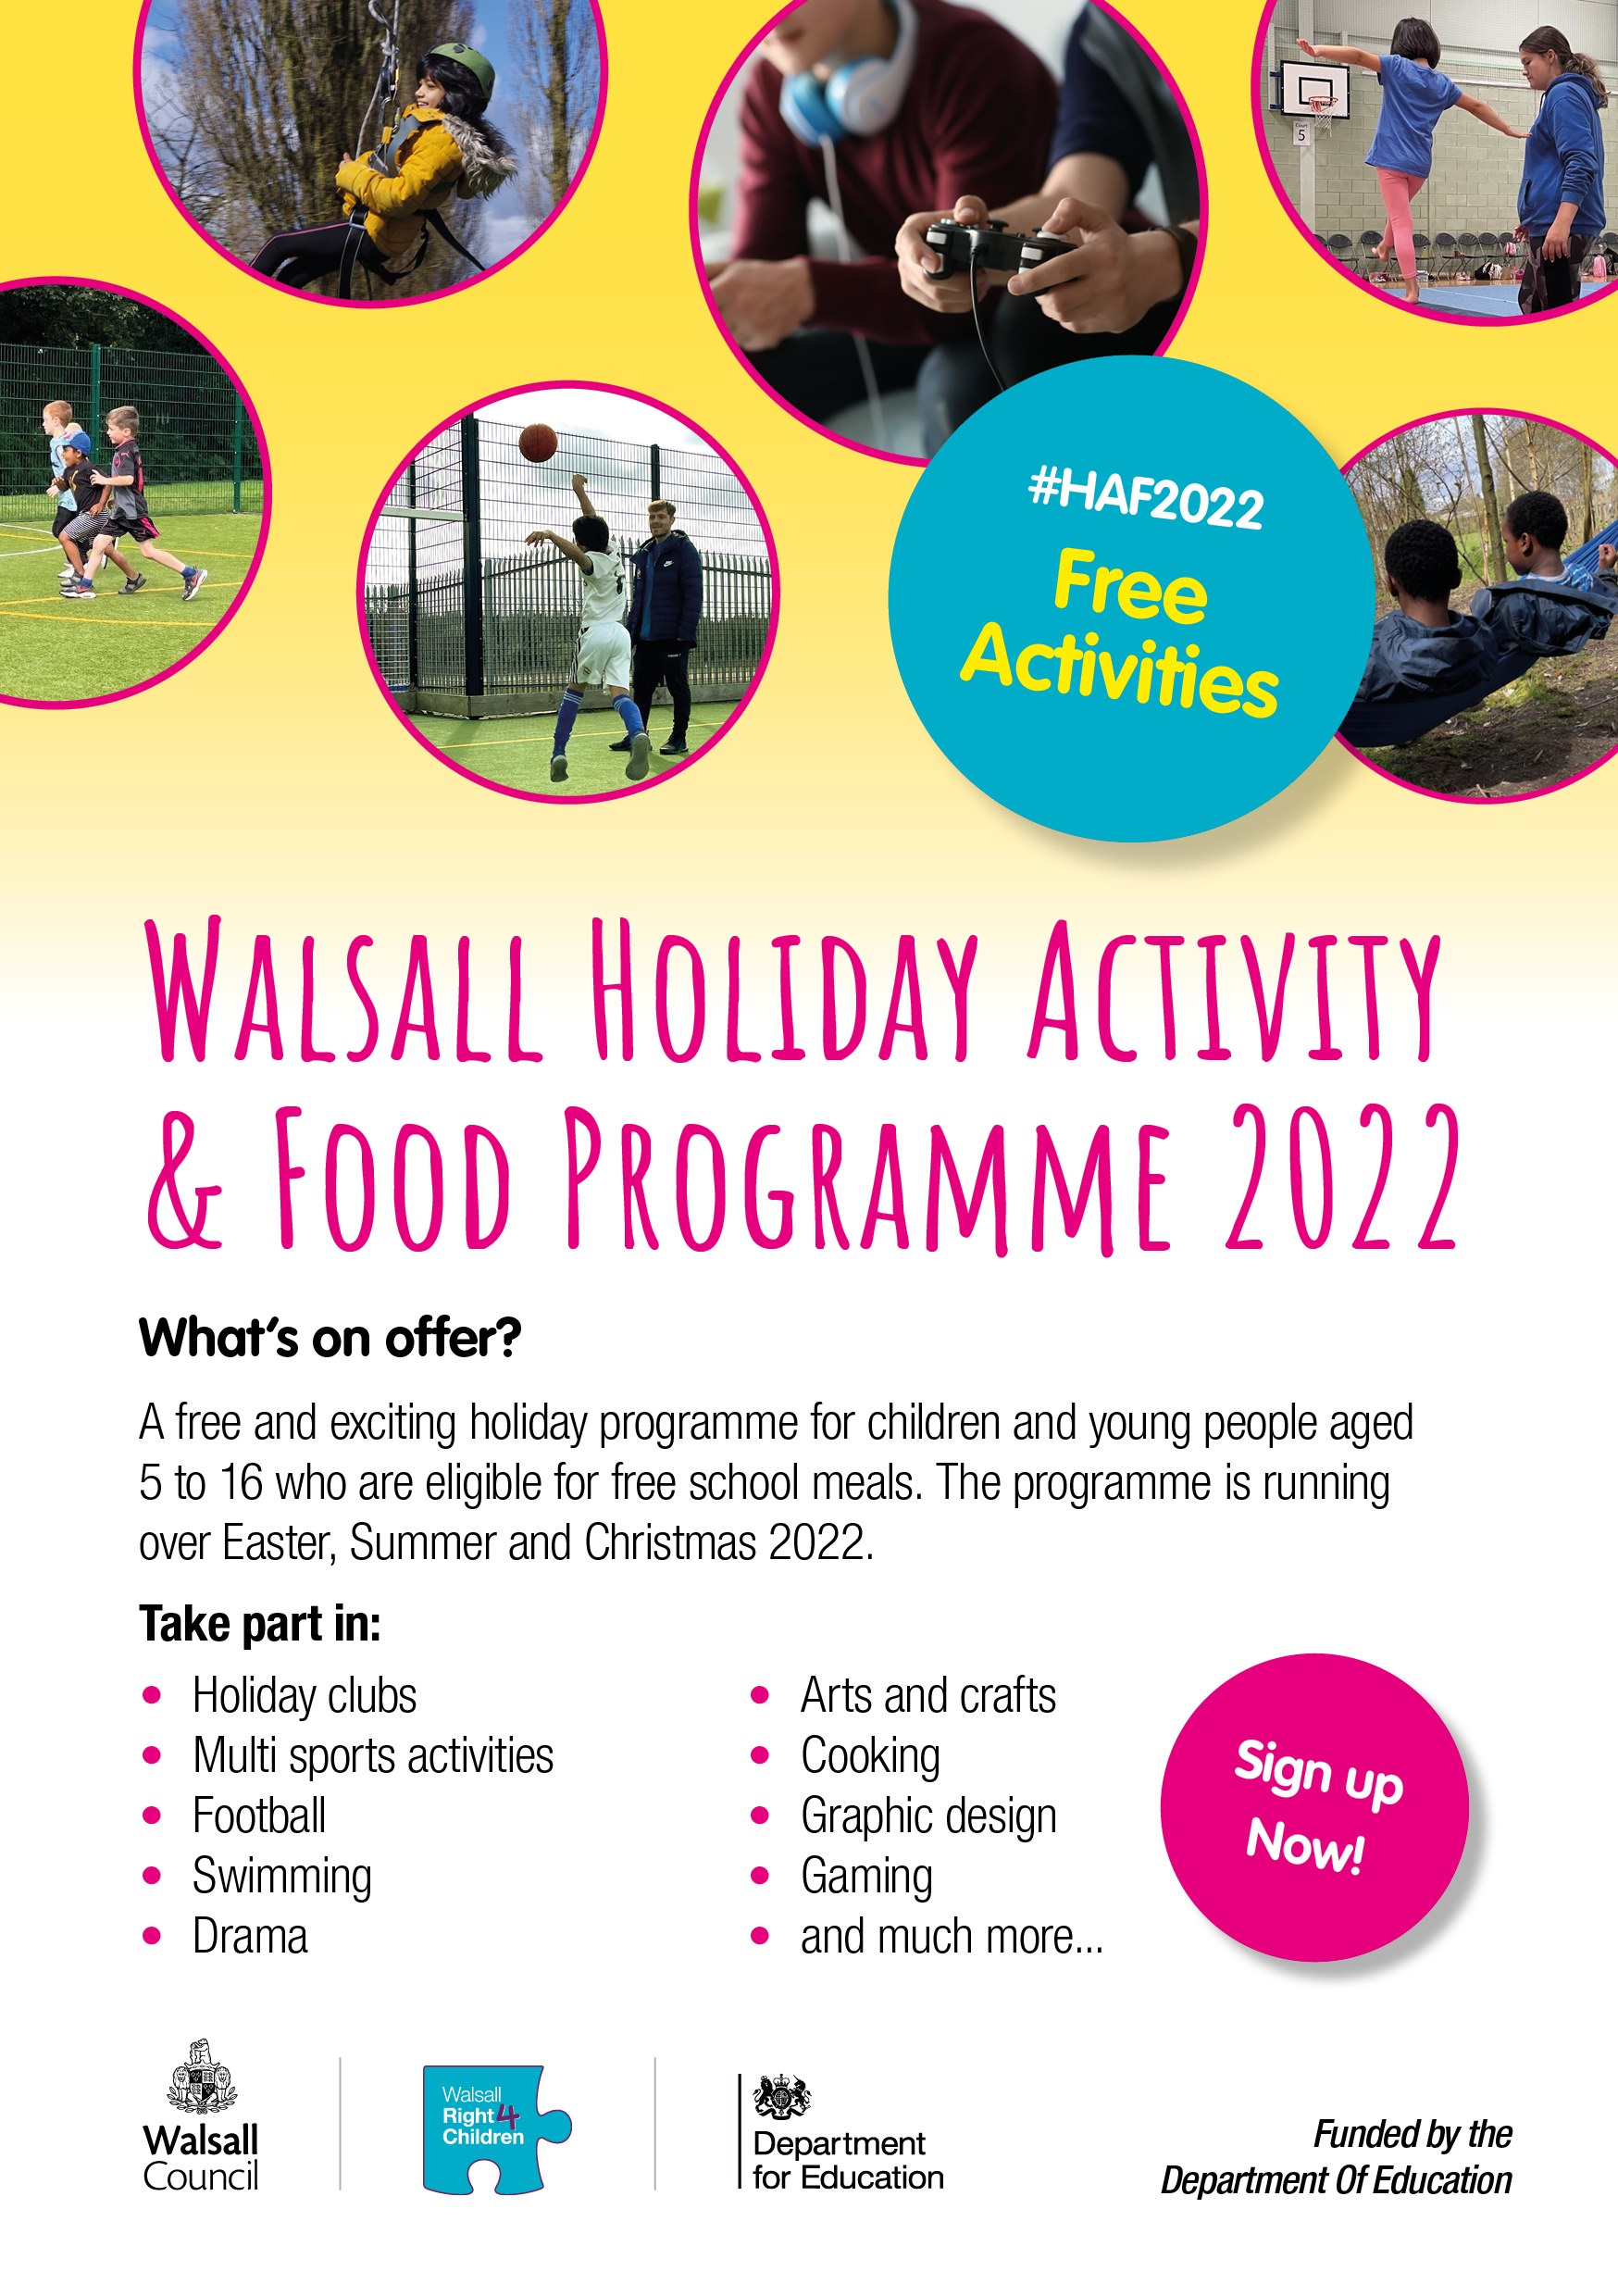 Walsall Holiday Activity & Food Programme Bloxwich Academy